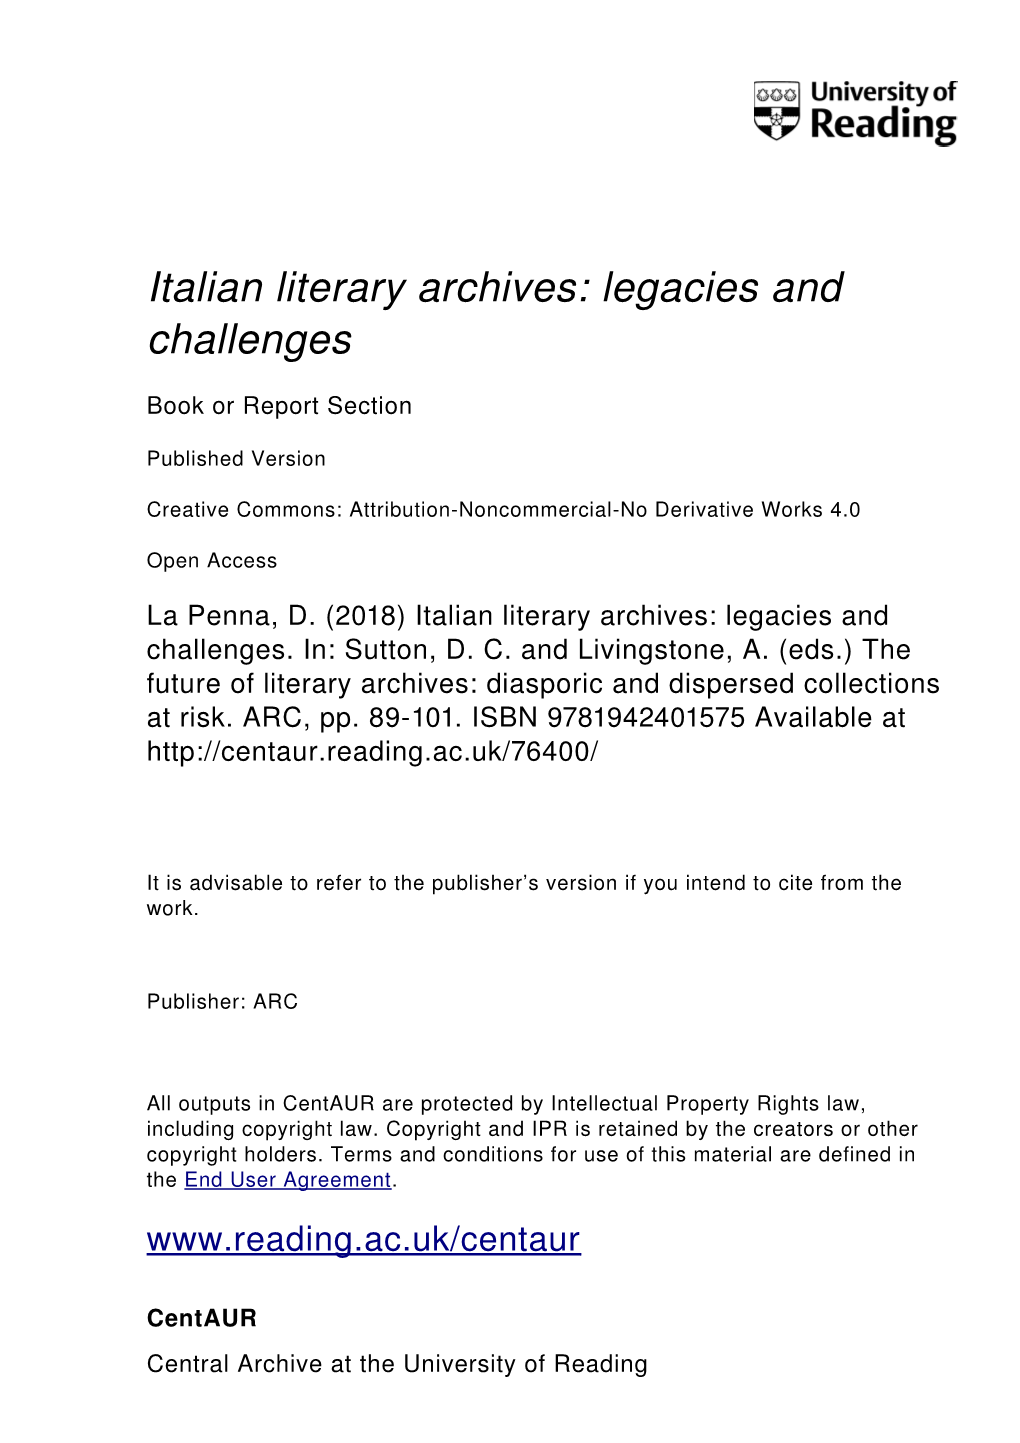 Italian Literary Archives: Legacies and Challenges